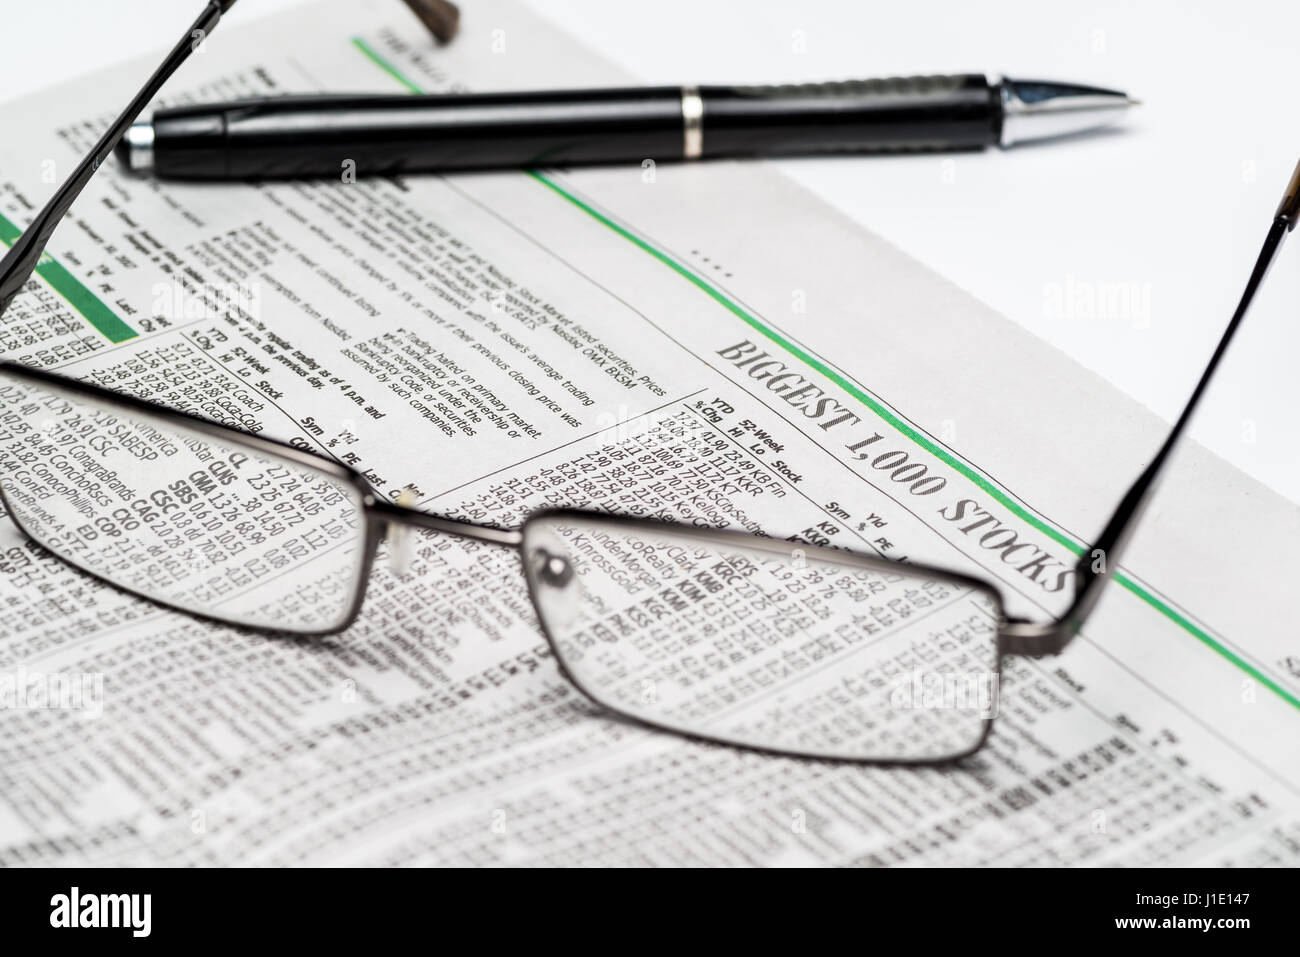 Chicago USA-Feb 12 2017:Glasses and a pen on a Stock Section of The Wall Street Journal Newspaper(for editorial use only) Stock Photo